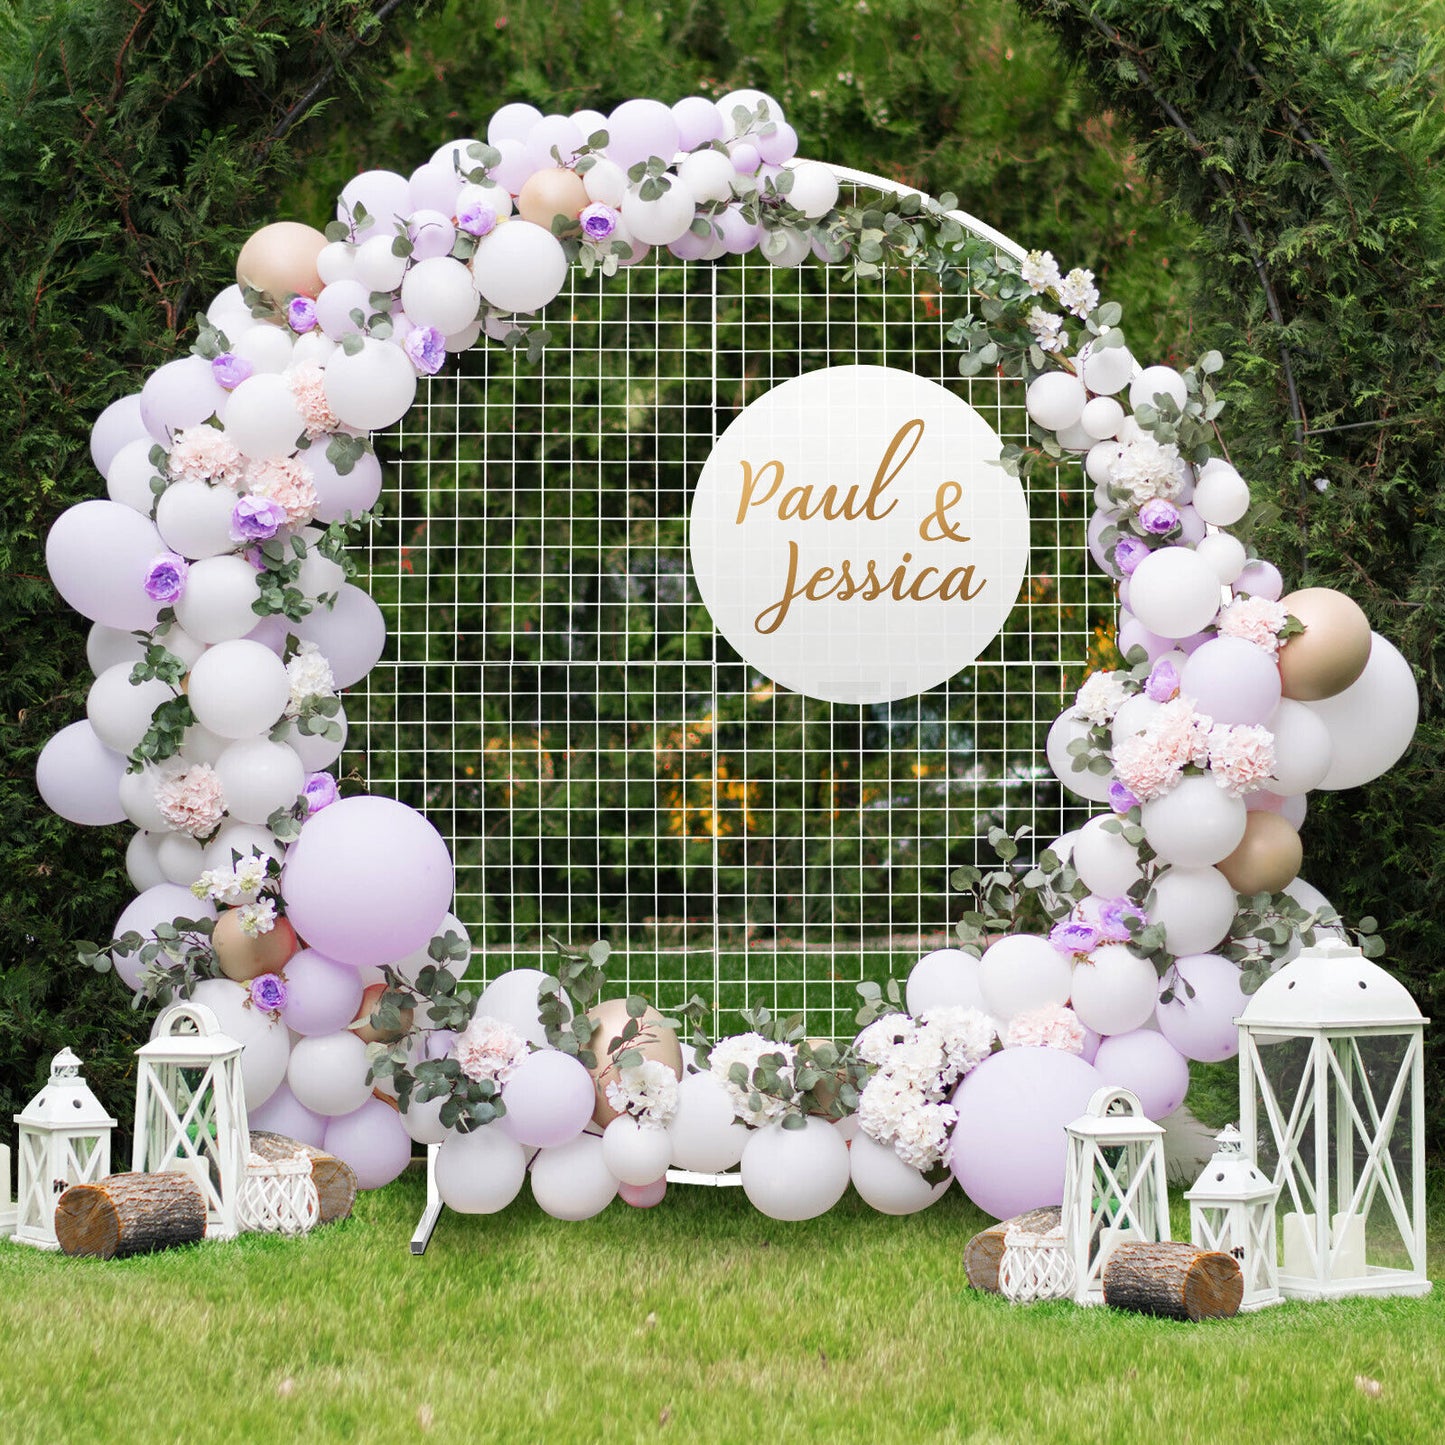 1.8M White Round Hoop Arch Mesh Backdrop Stand Flowers Wedding Party Decoration